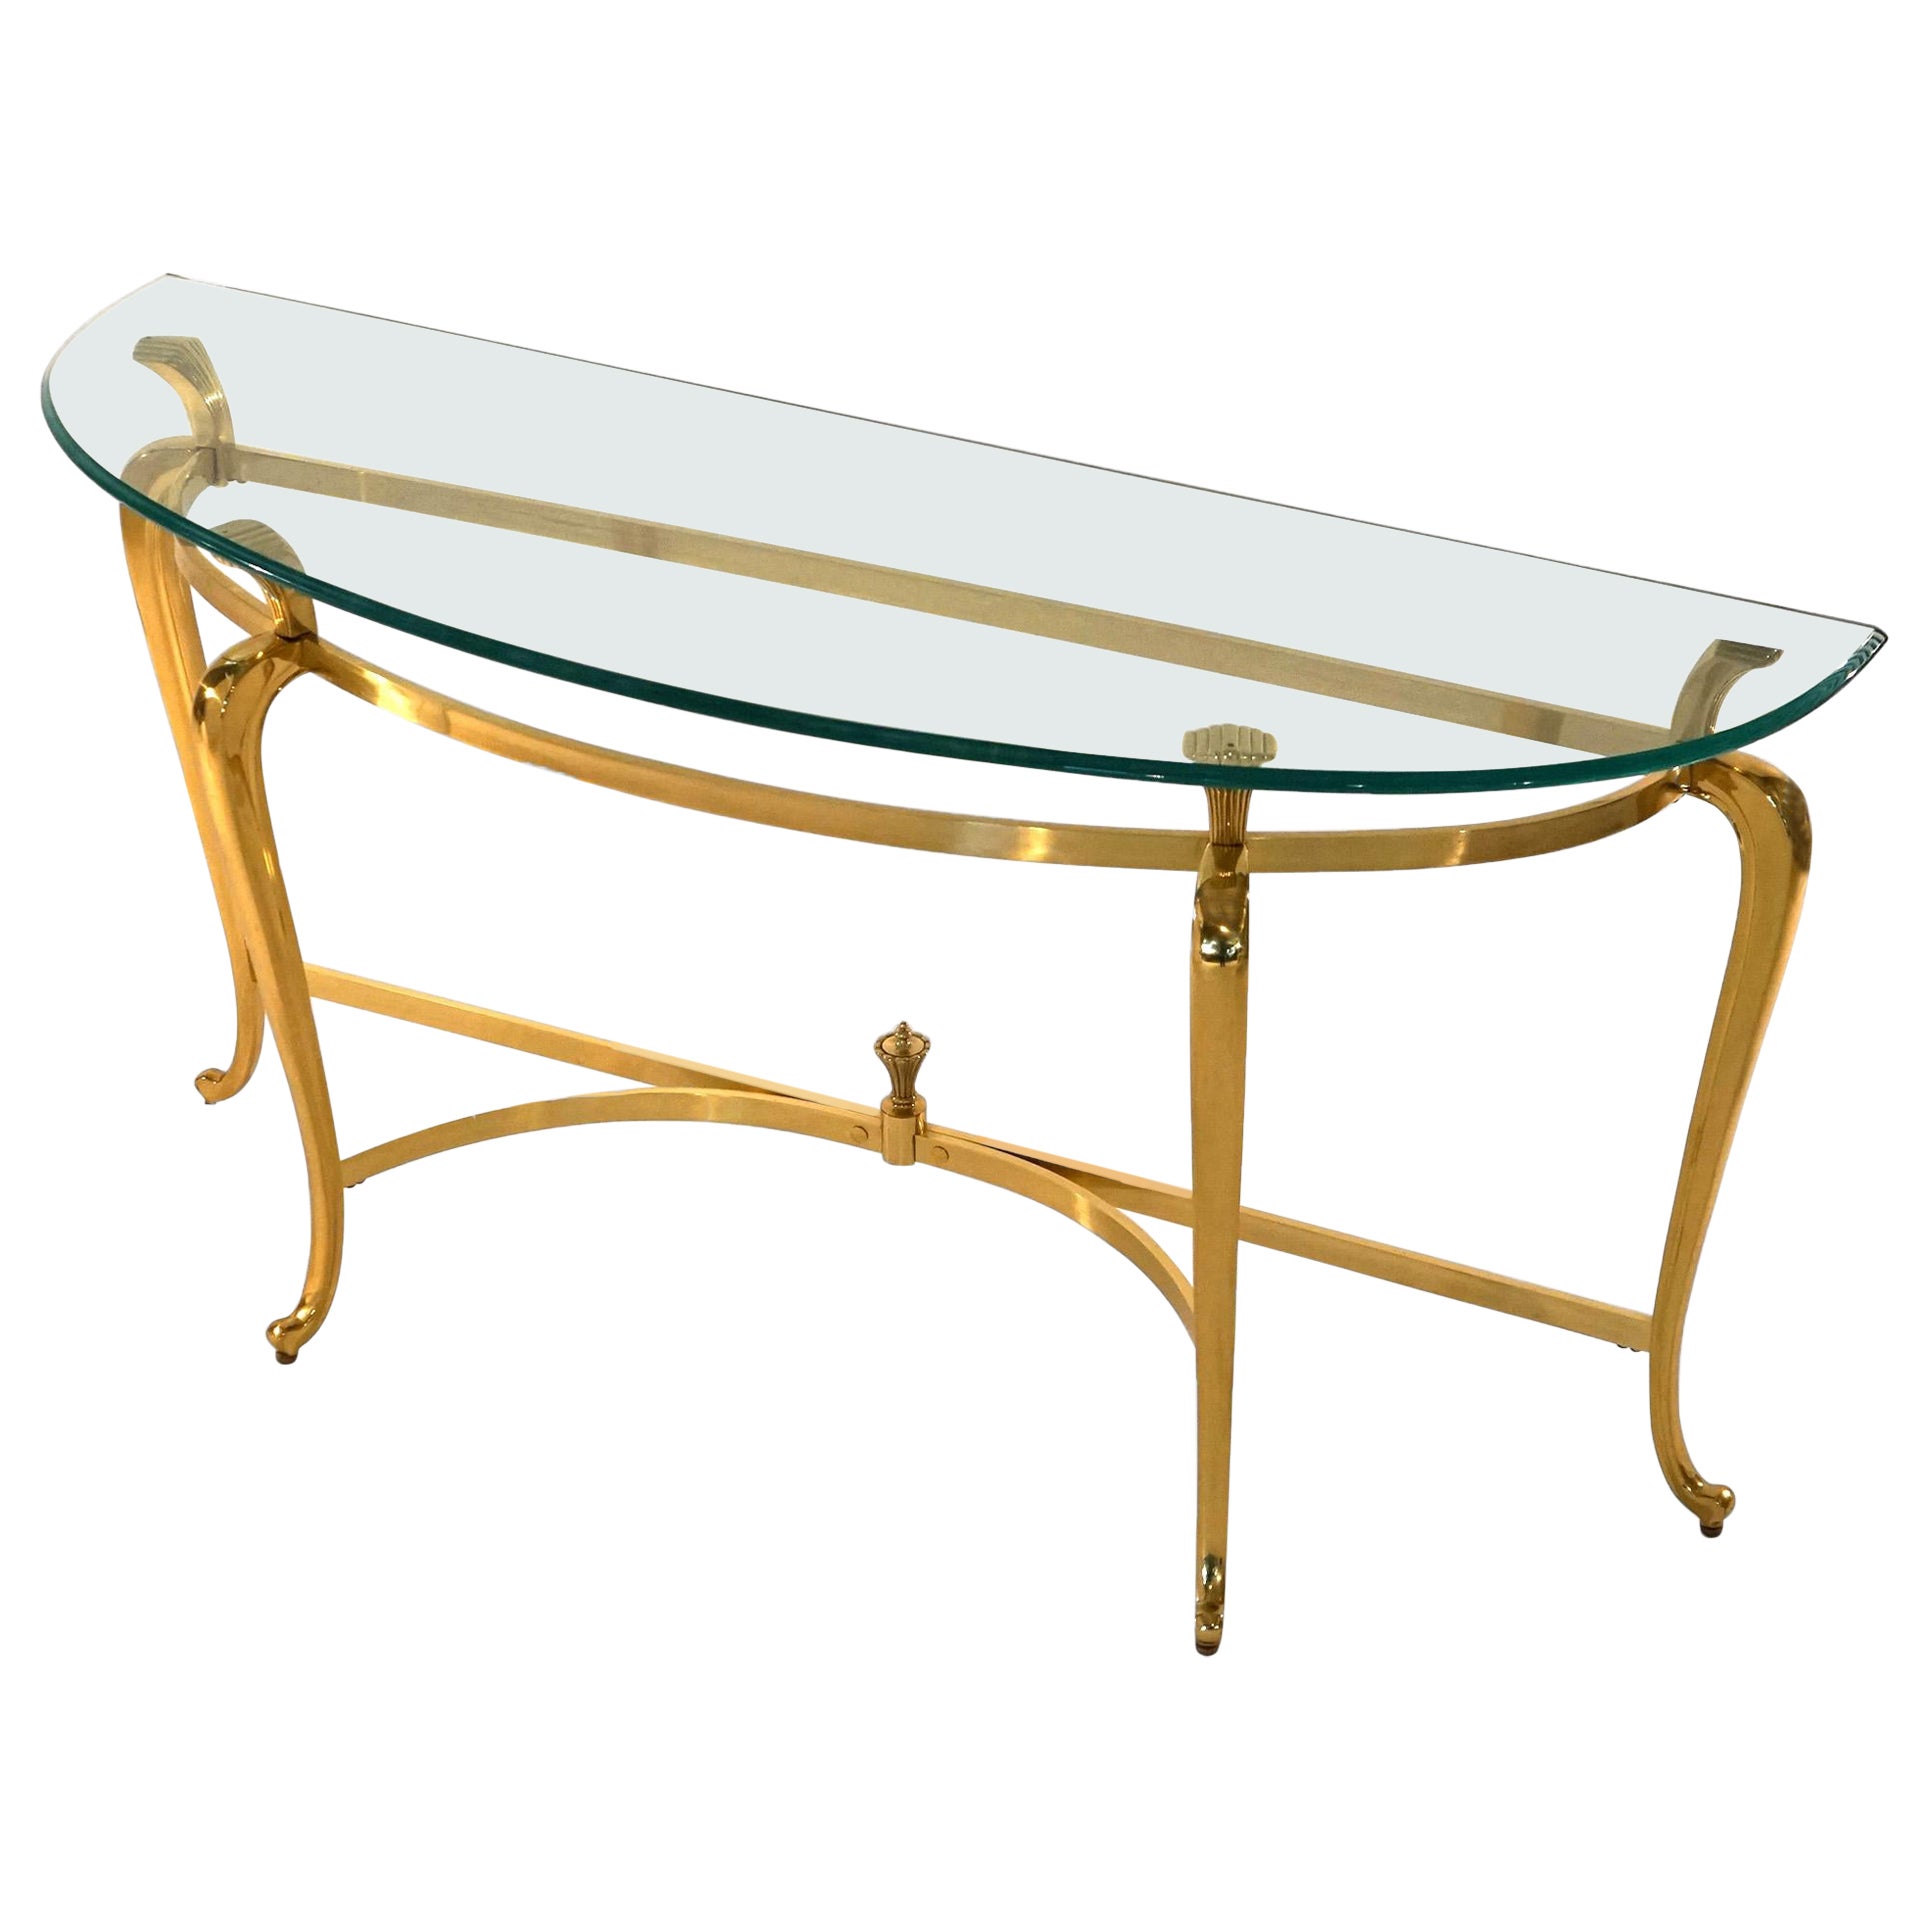 French Louis XIV Style Bronzed Gilt Metal Glass Top Console Table 20th C For Sale